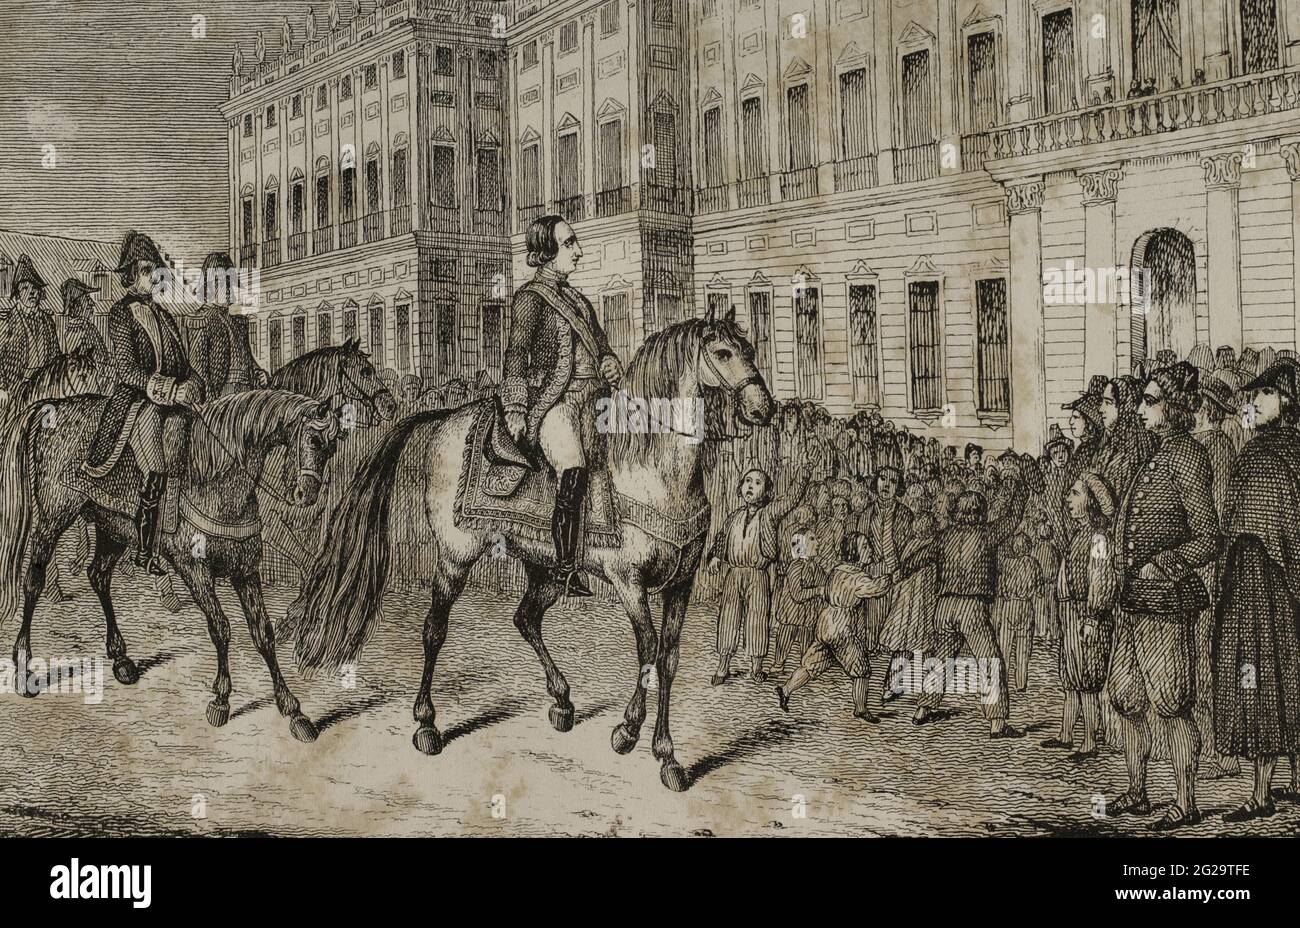 Reign of Charles IV of Spain. On 13 January 1807 the king appointed Manuel Godoy Admiral General of Spain and the Indies, with the title of Serene Highness. Godoy's entrance after his appointment. Engraving. Historia del Levantamiento, guerra y revolución de España by the Conde de Toreno. Madrid, 1851. Stock Photo